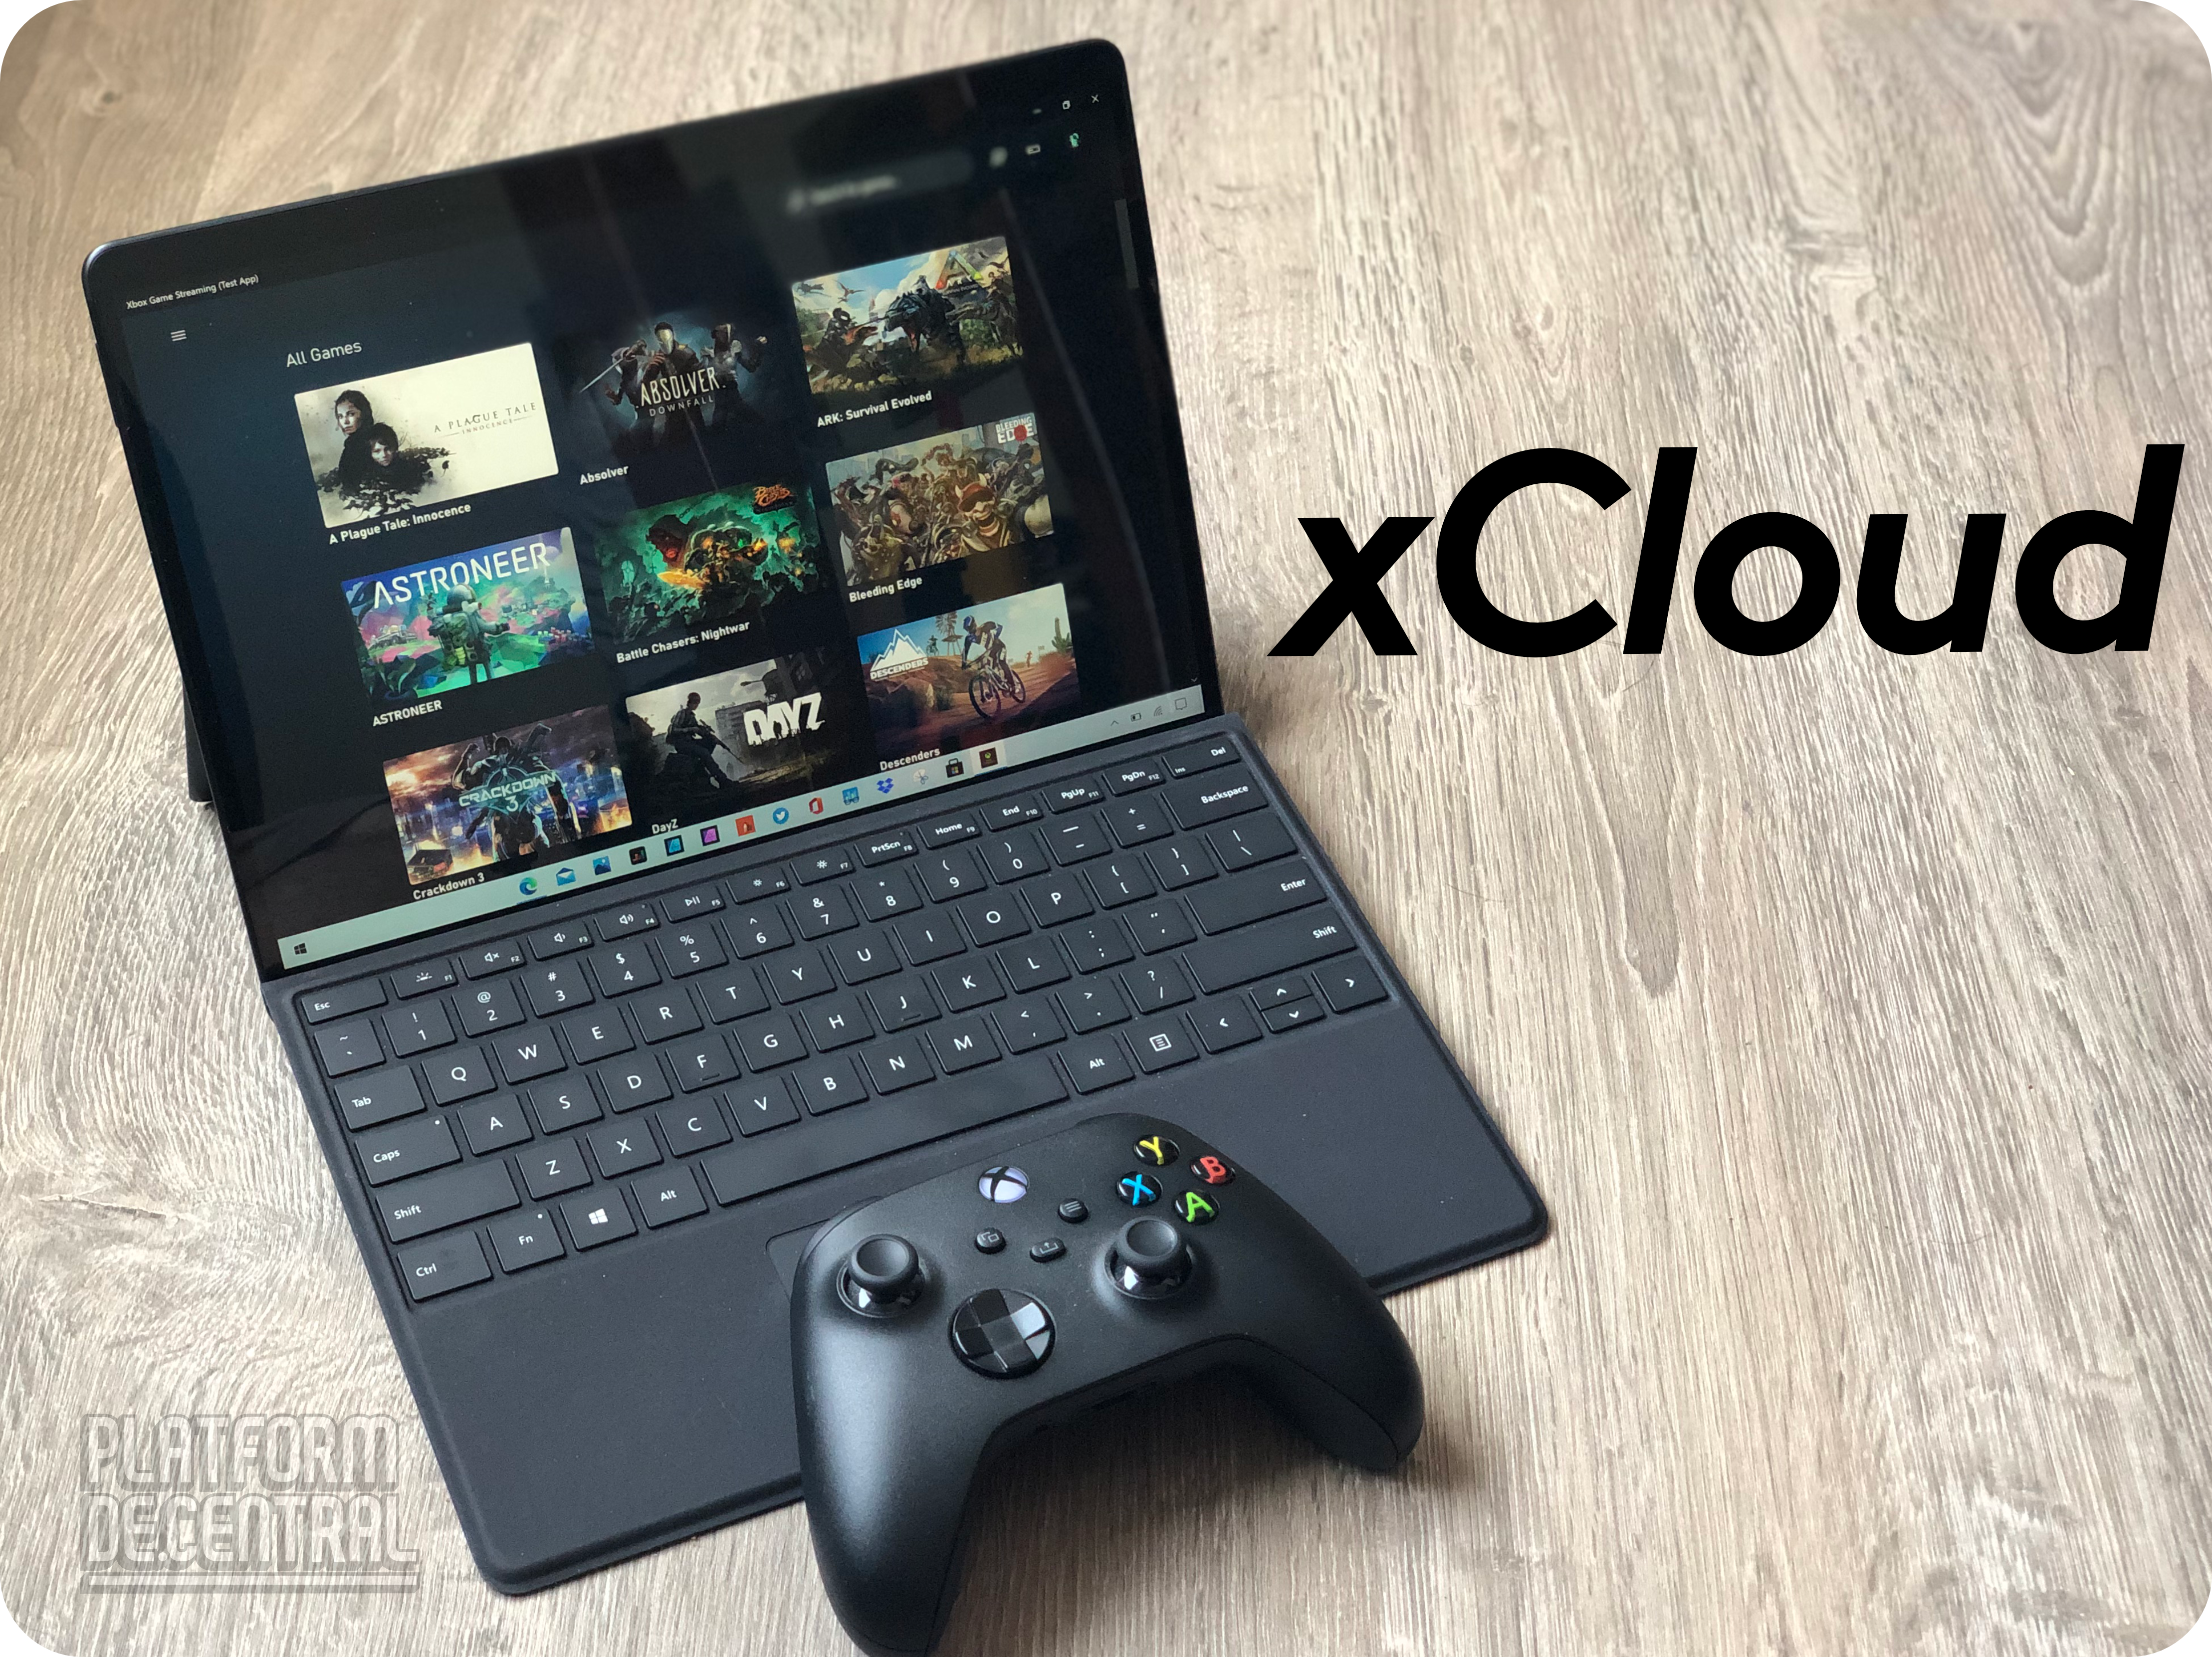 How to install the xCloud App on Surface Pro X or any other PC